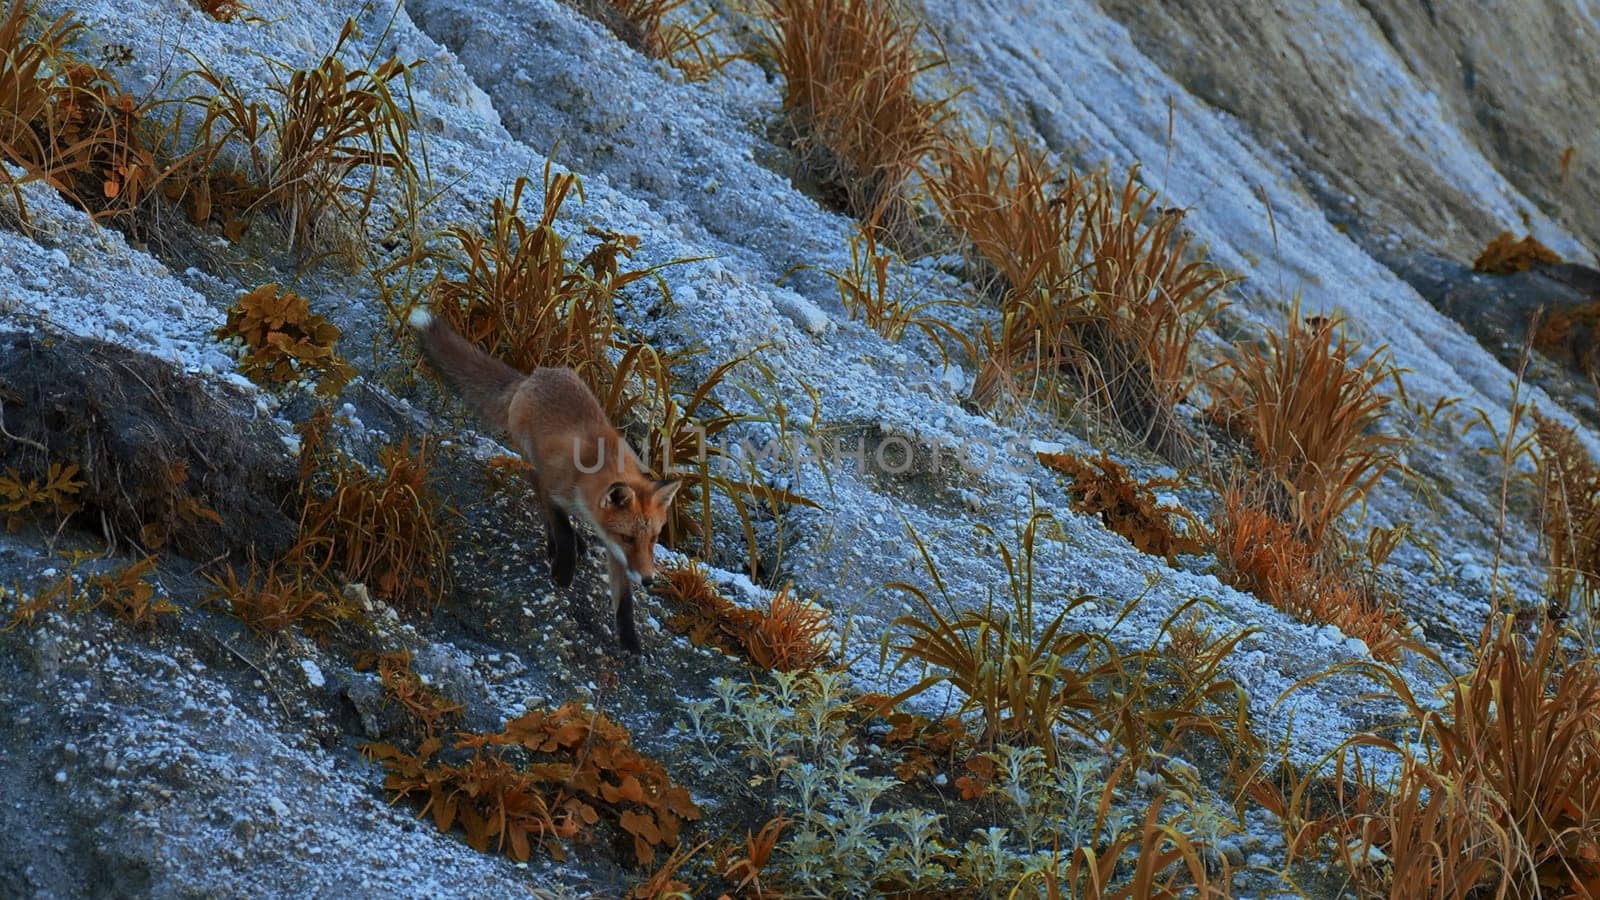 Beautiful red fox with prey in autumn grass. Clip. Fox took food in its mouth and took it away. Wild fox prey in environment with autumn grass on rocky slope.